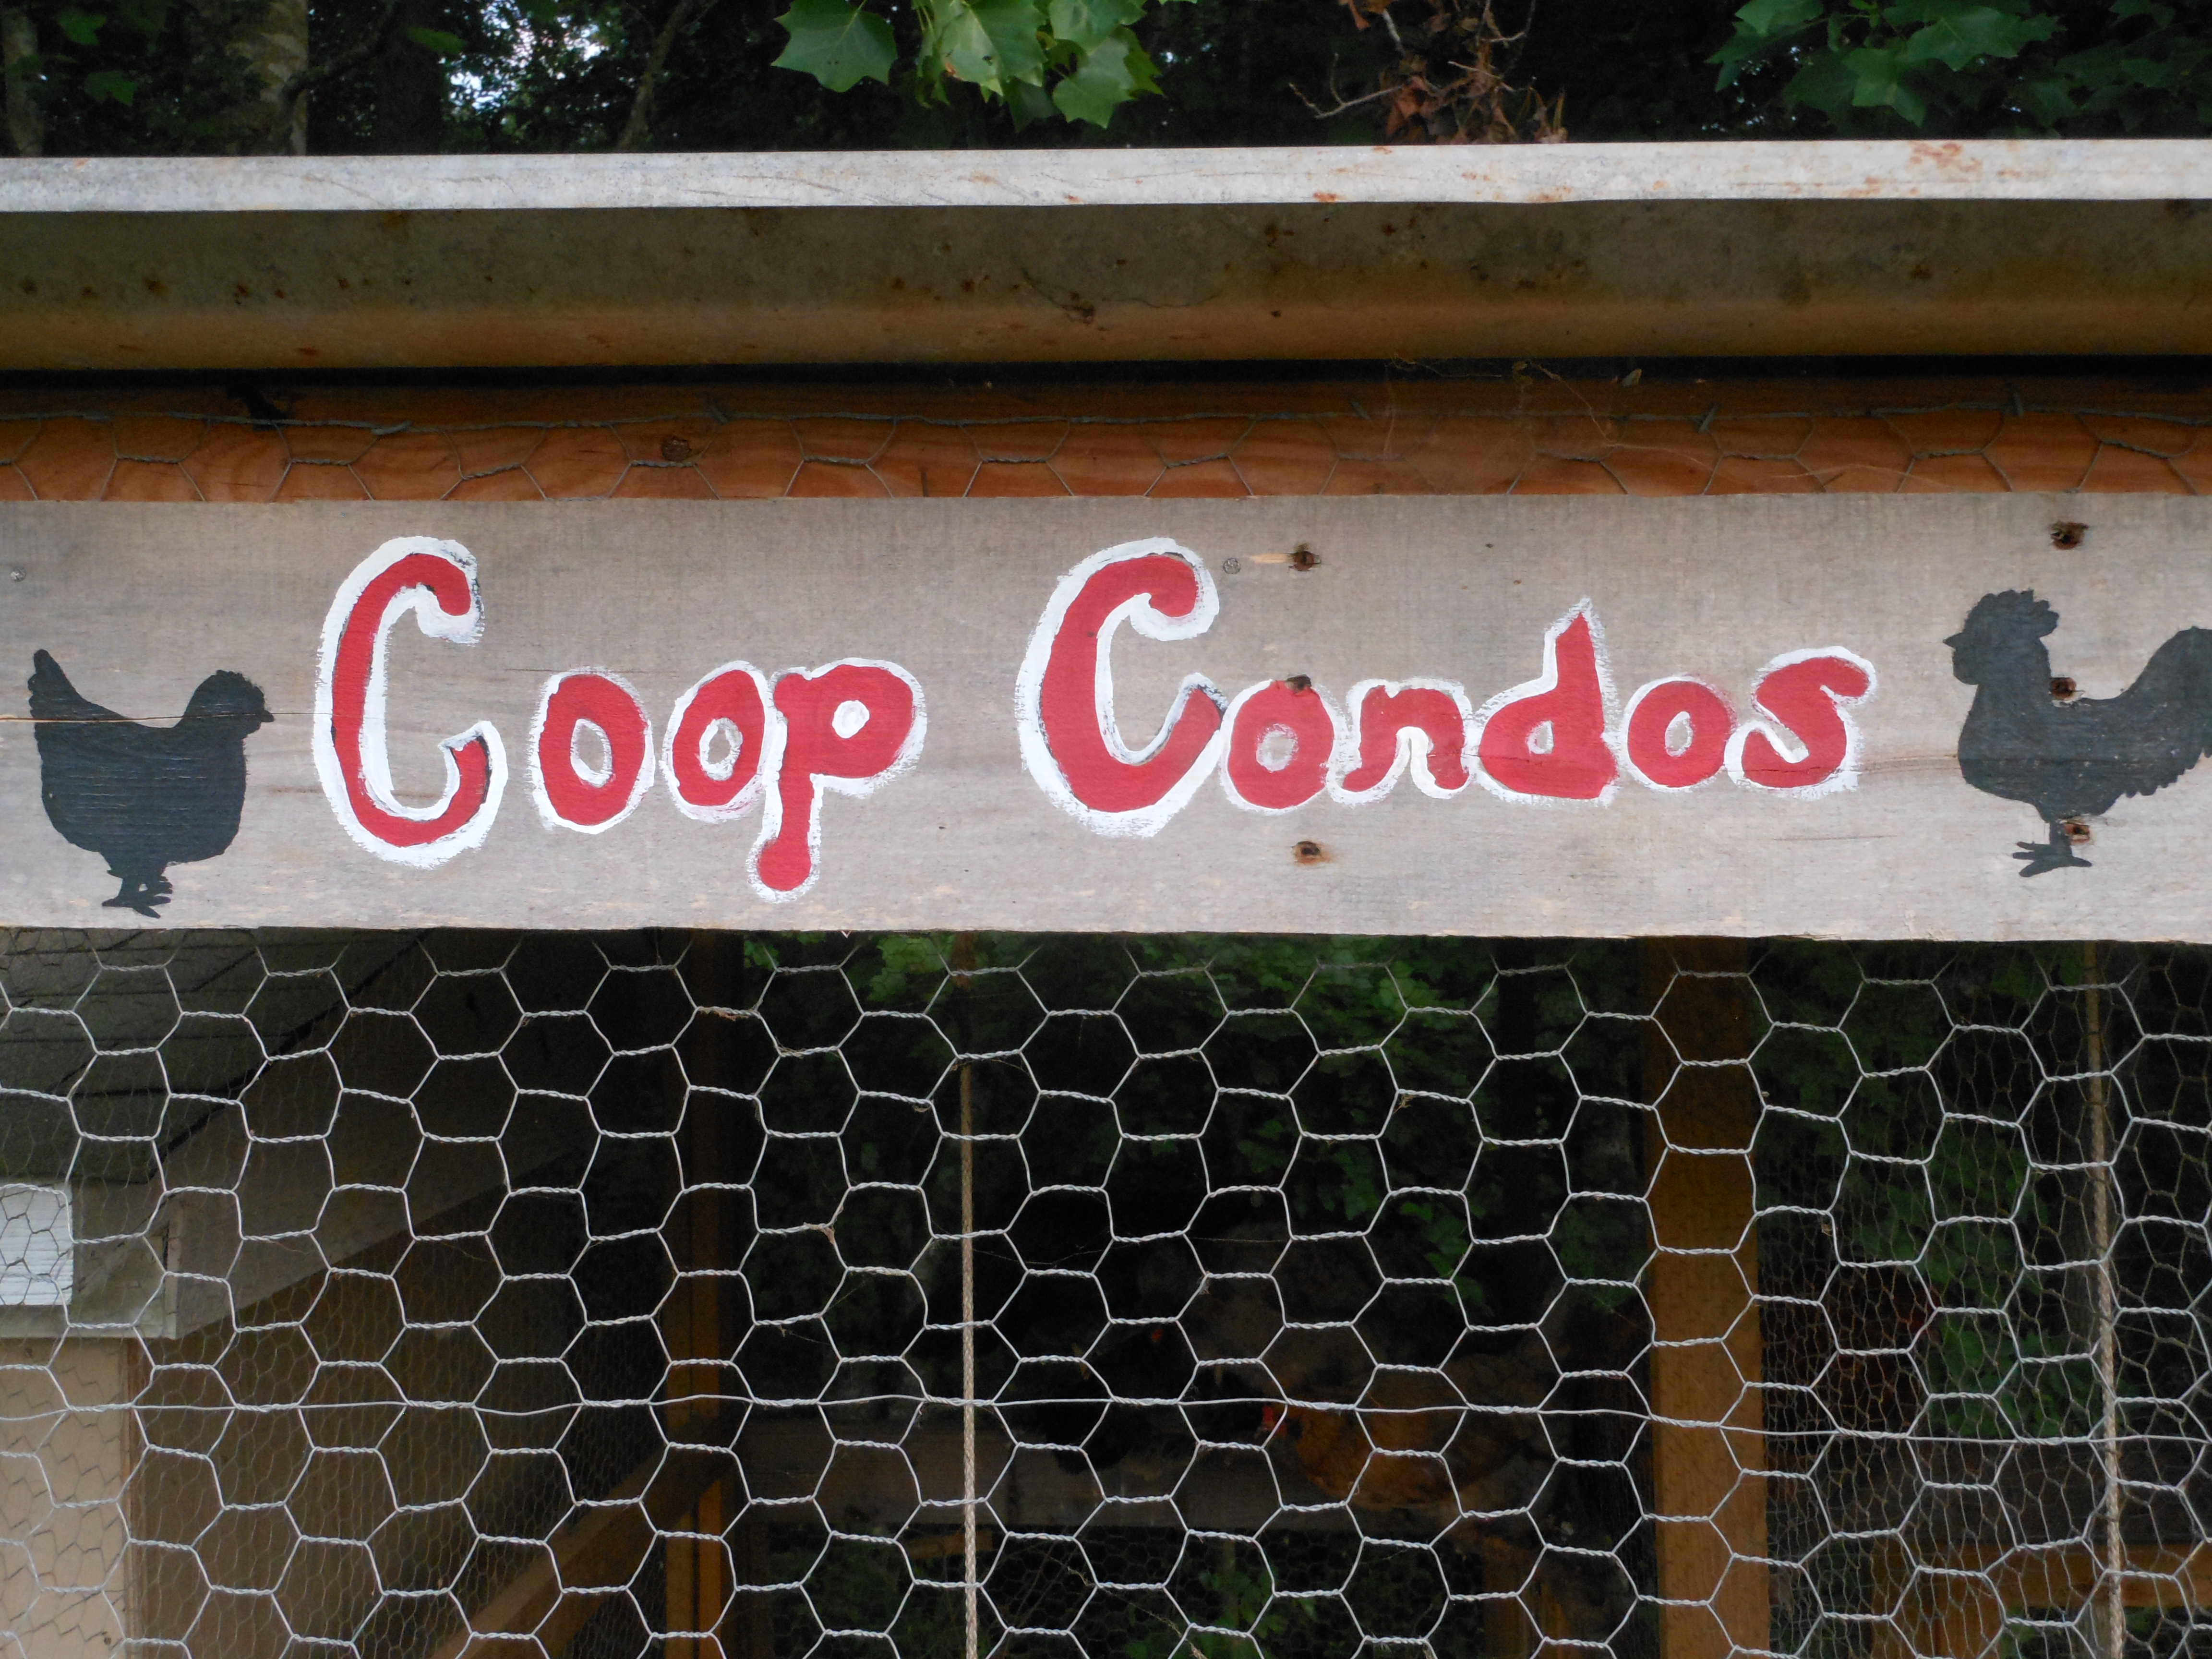 Coop Condos "welcome" sign